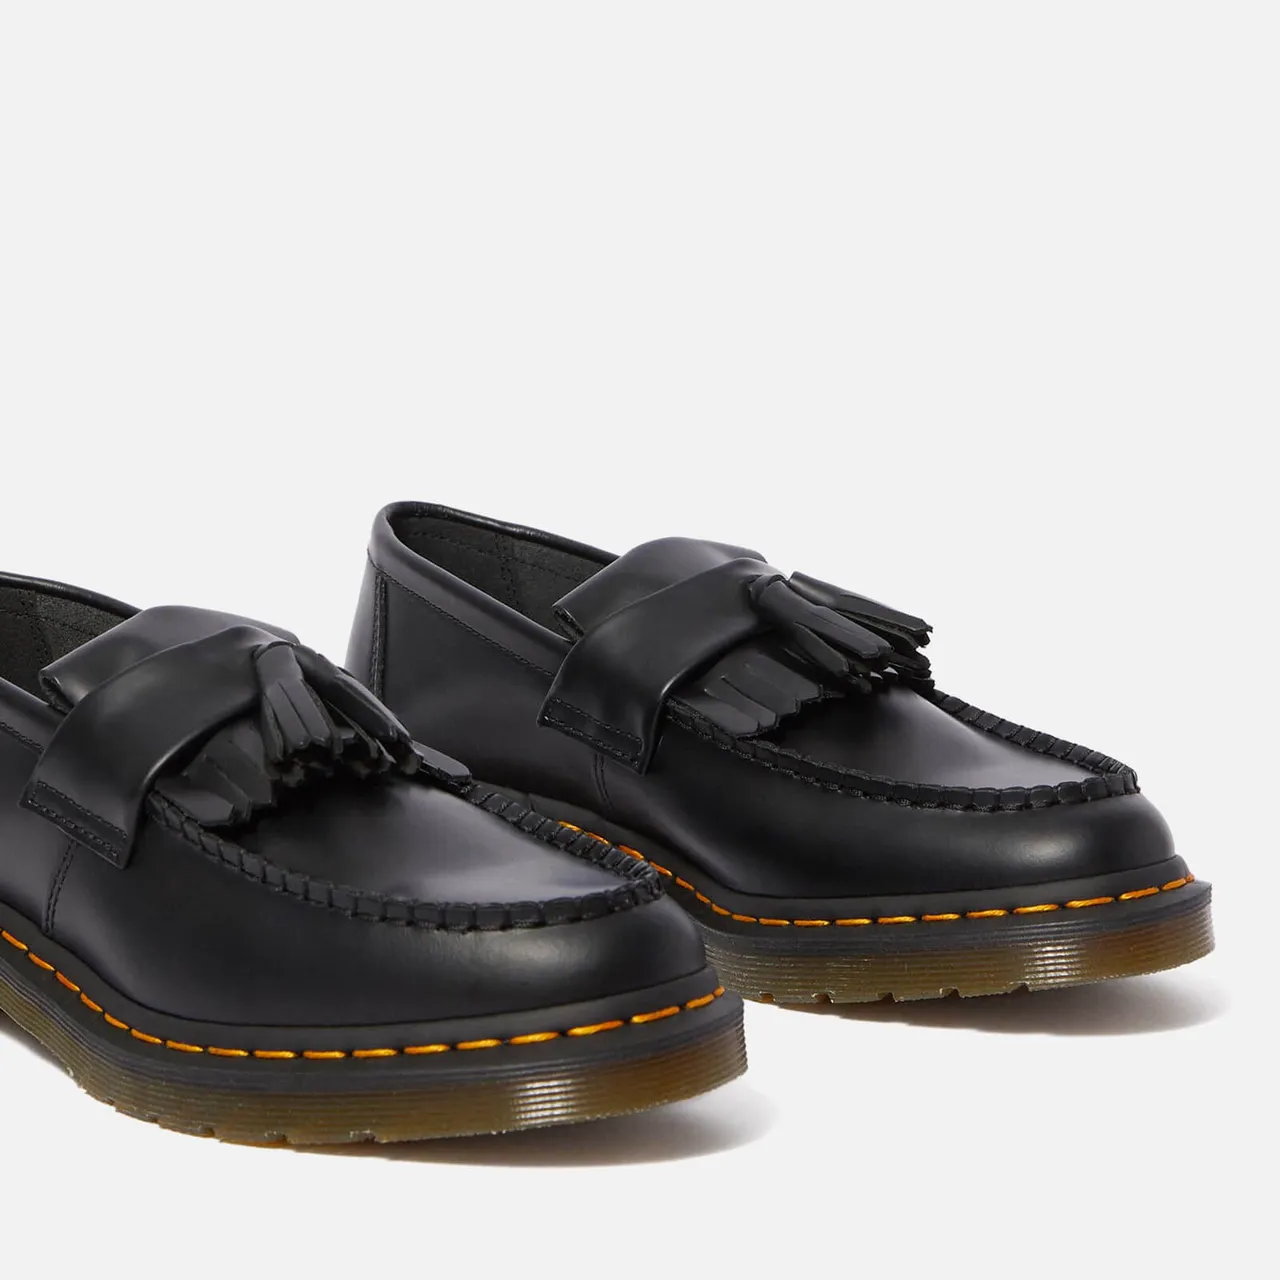 Dr. Martens Adrian Leather Loafers - UK